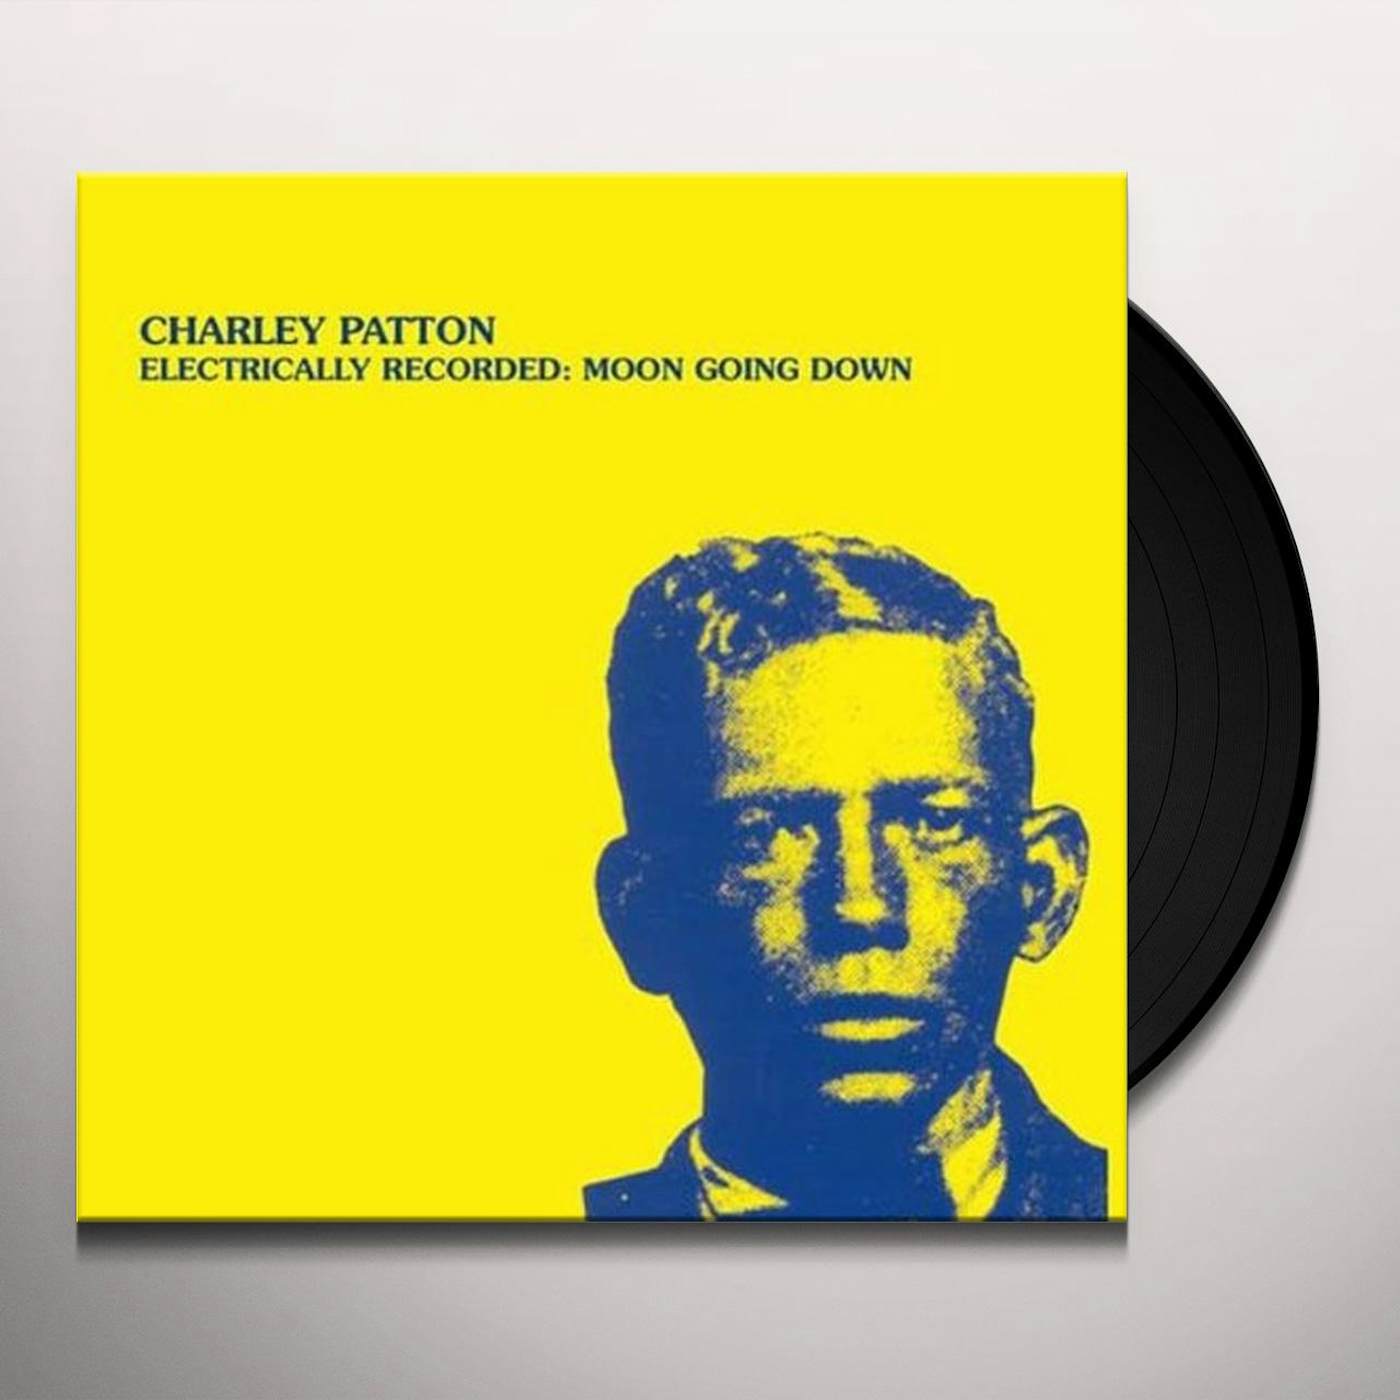 Charley Patton ELECTRICALLY RECORDED: MOON GOING DOWN Vinyl Record